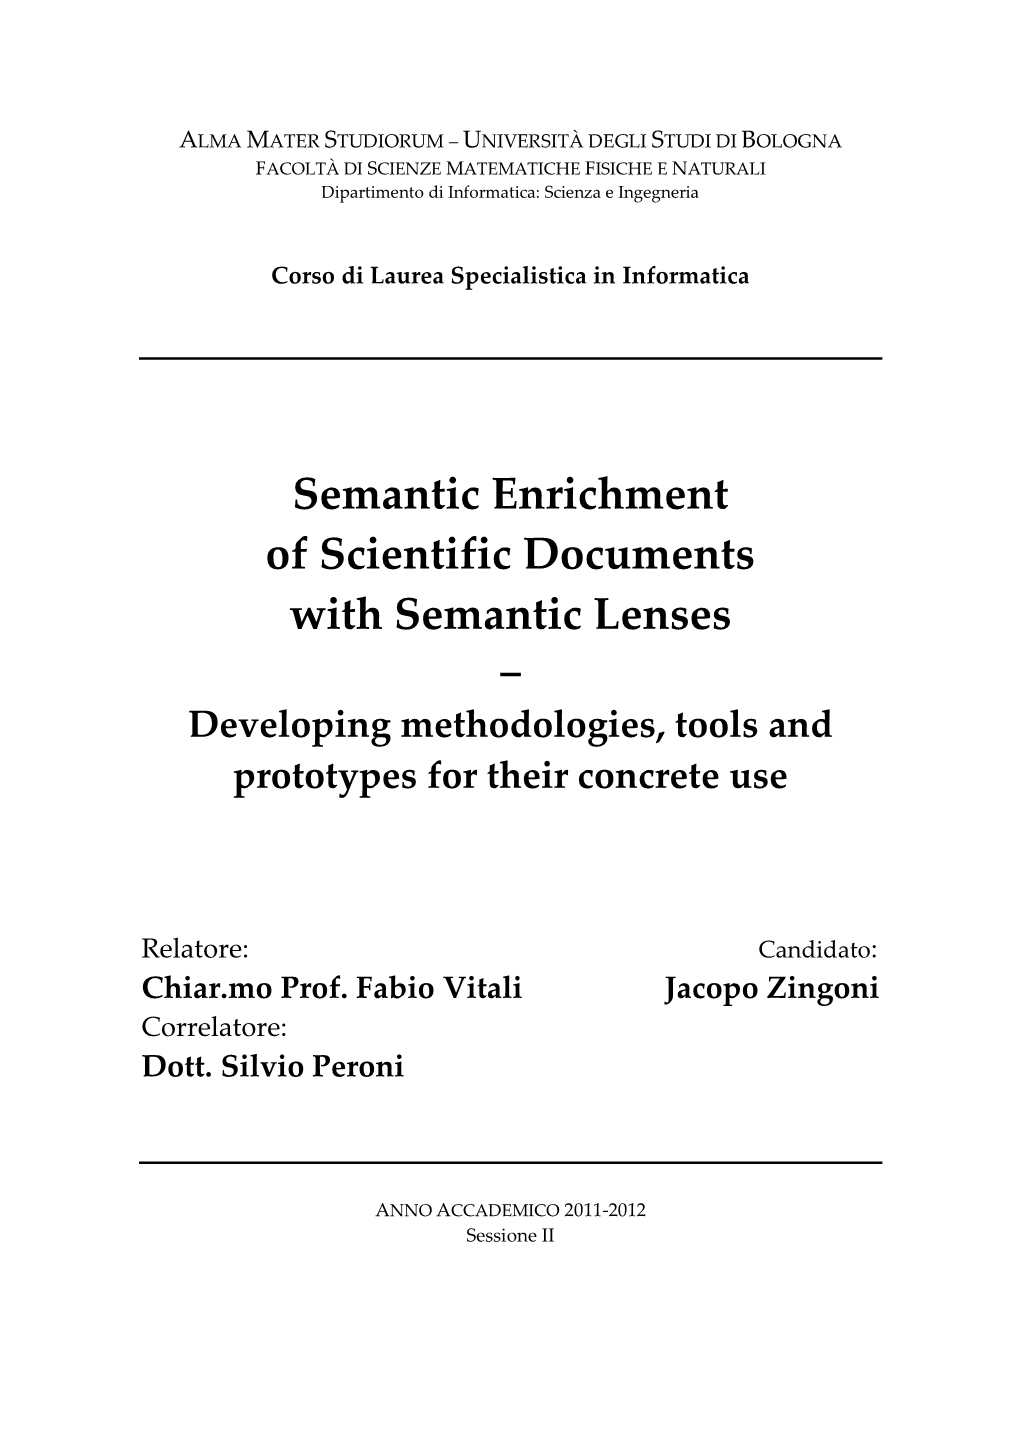 Semantic Enrichment of Scientific Documents with Semantic Lenses – Developing Methodologies, Tools and Prototypes for Their Concrete Use